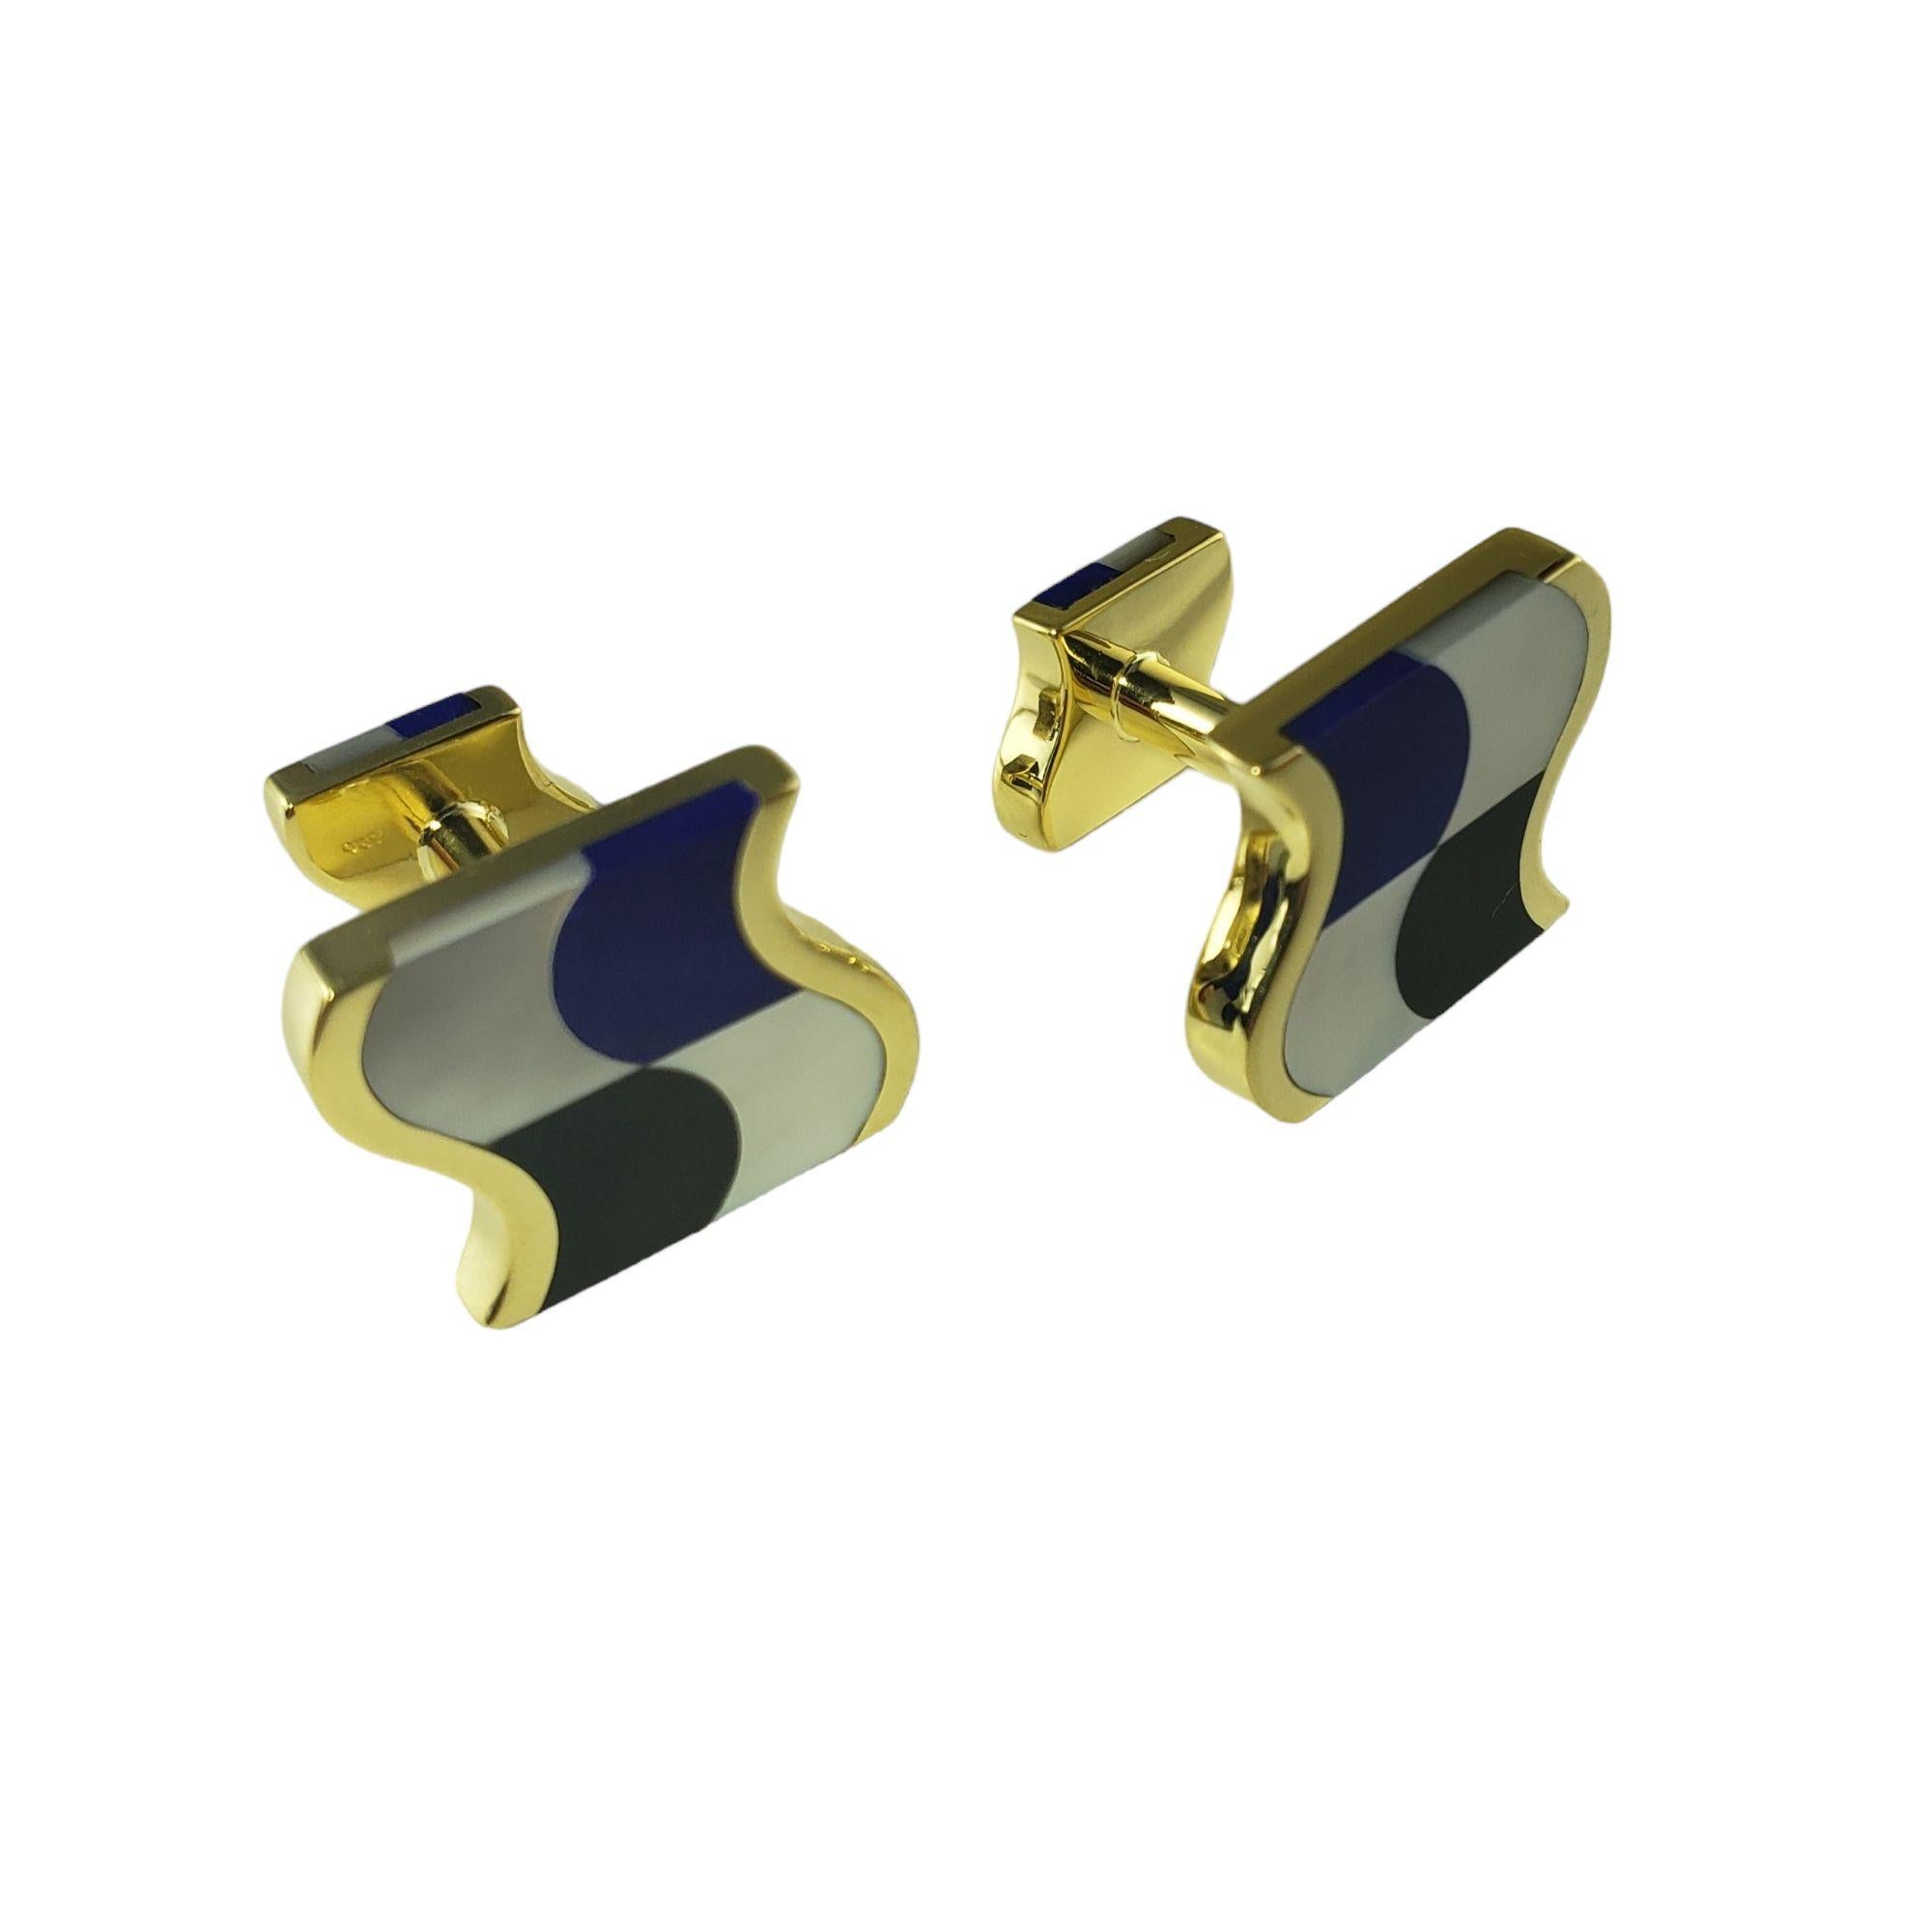 Angela Cummings for Tiffany & Co. 18 Karat Yellow Gold Mother of Pearl, Lapis Lazuli and Onyx Cufflinks-

These elegant cufflinks by Angela Cummings for Tiffany & Co. feature inlay mother of pearl, onyx and lapis lazuli set in elegant 18K yellow